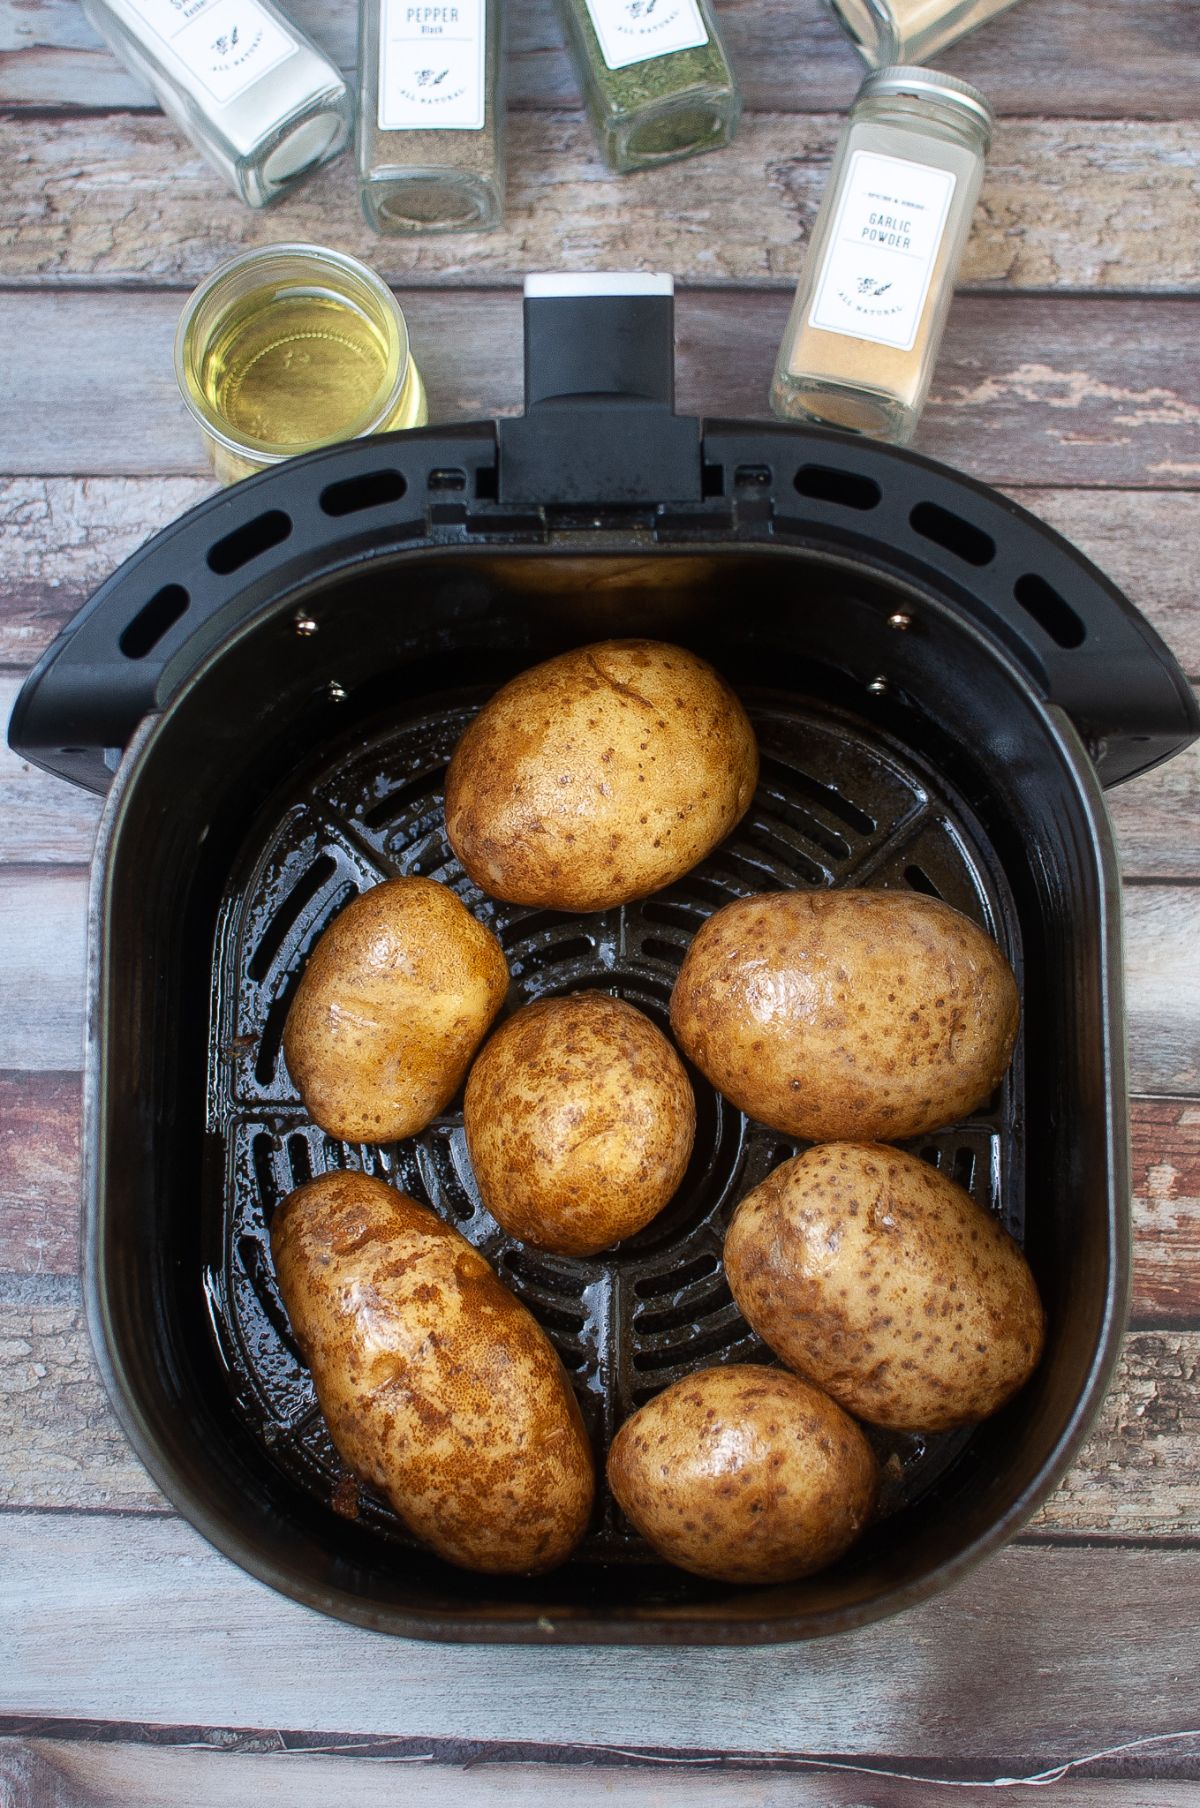 Potatoes coated with oil in the air fryer next to more oil in a jar and jars of spices